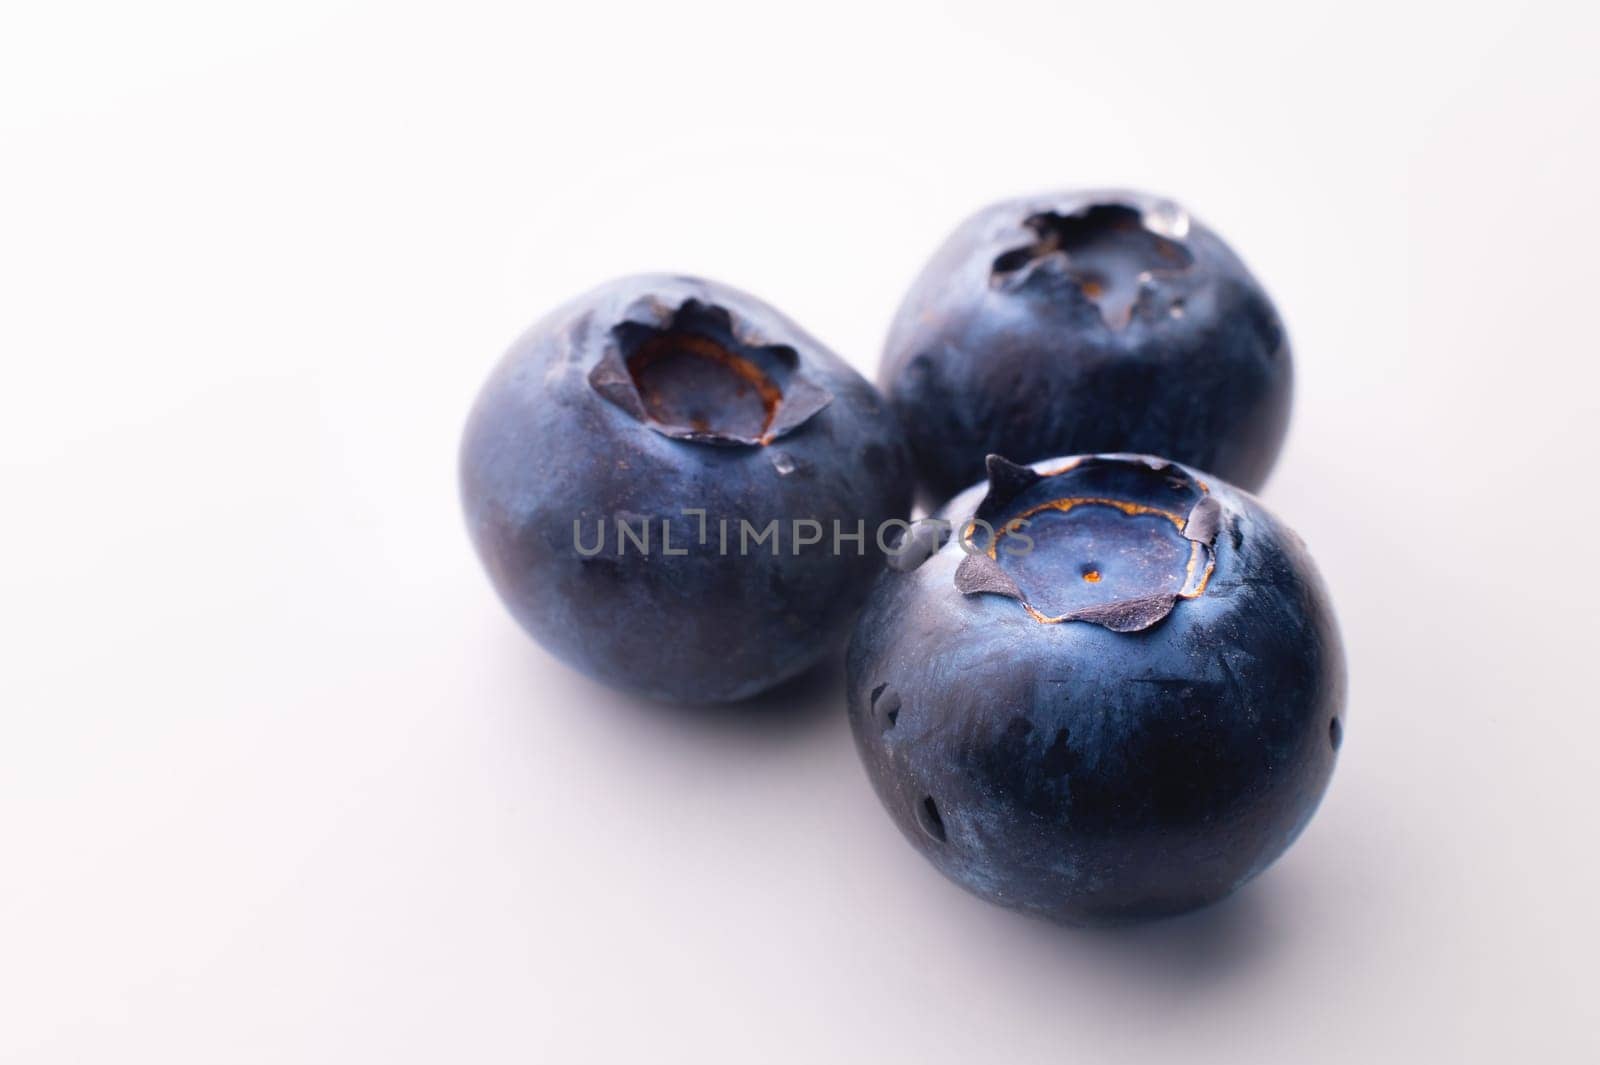 Blueberries on a white background. Three blueberries lie on the table, close-up by yanik88